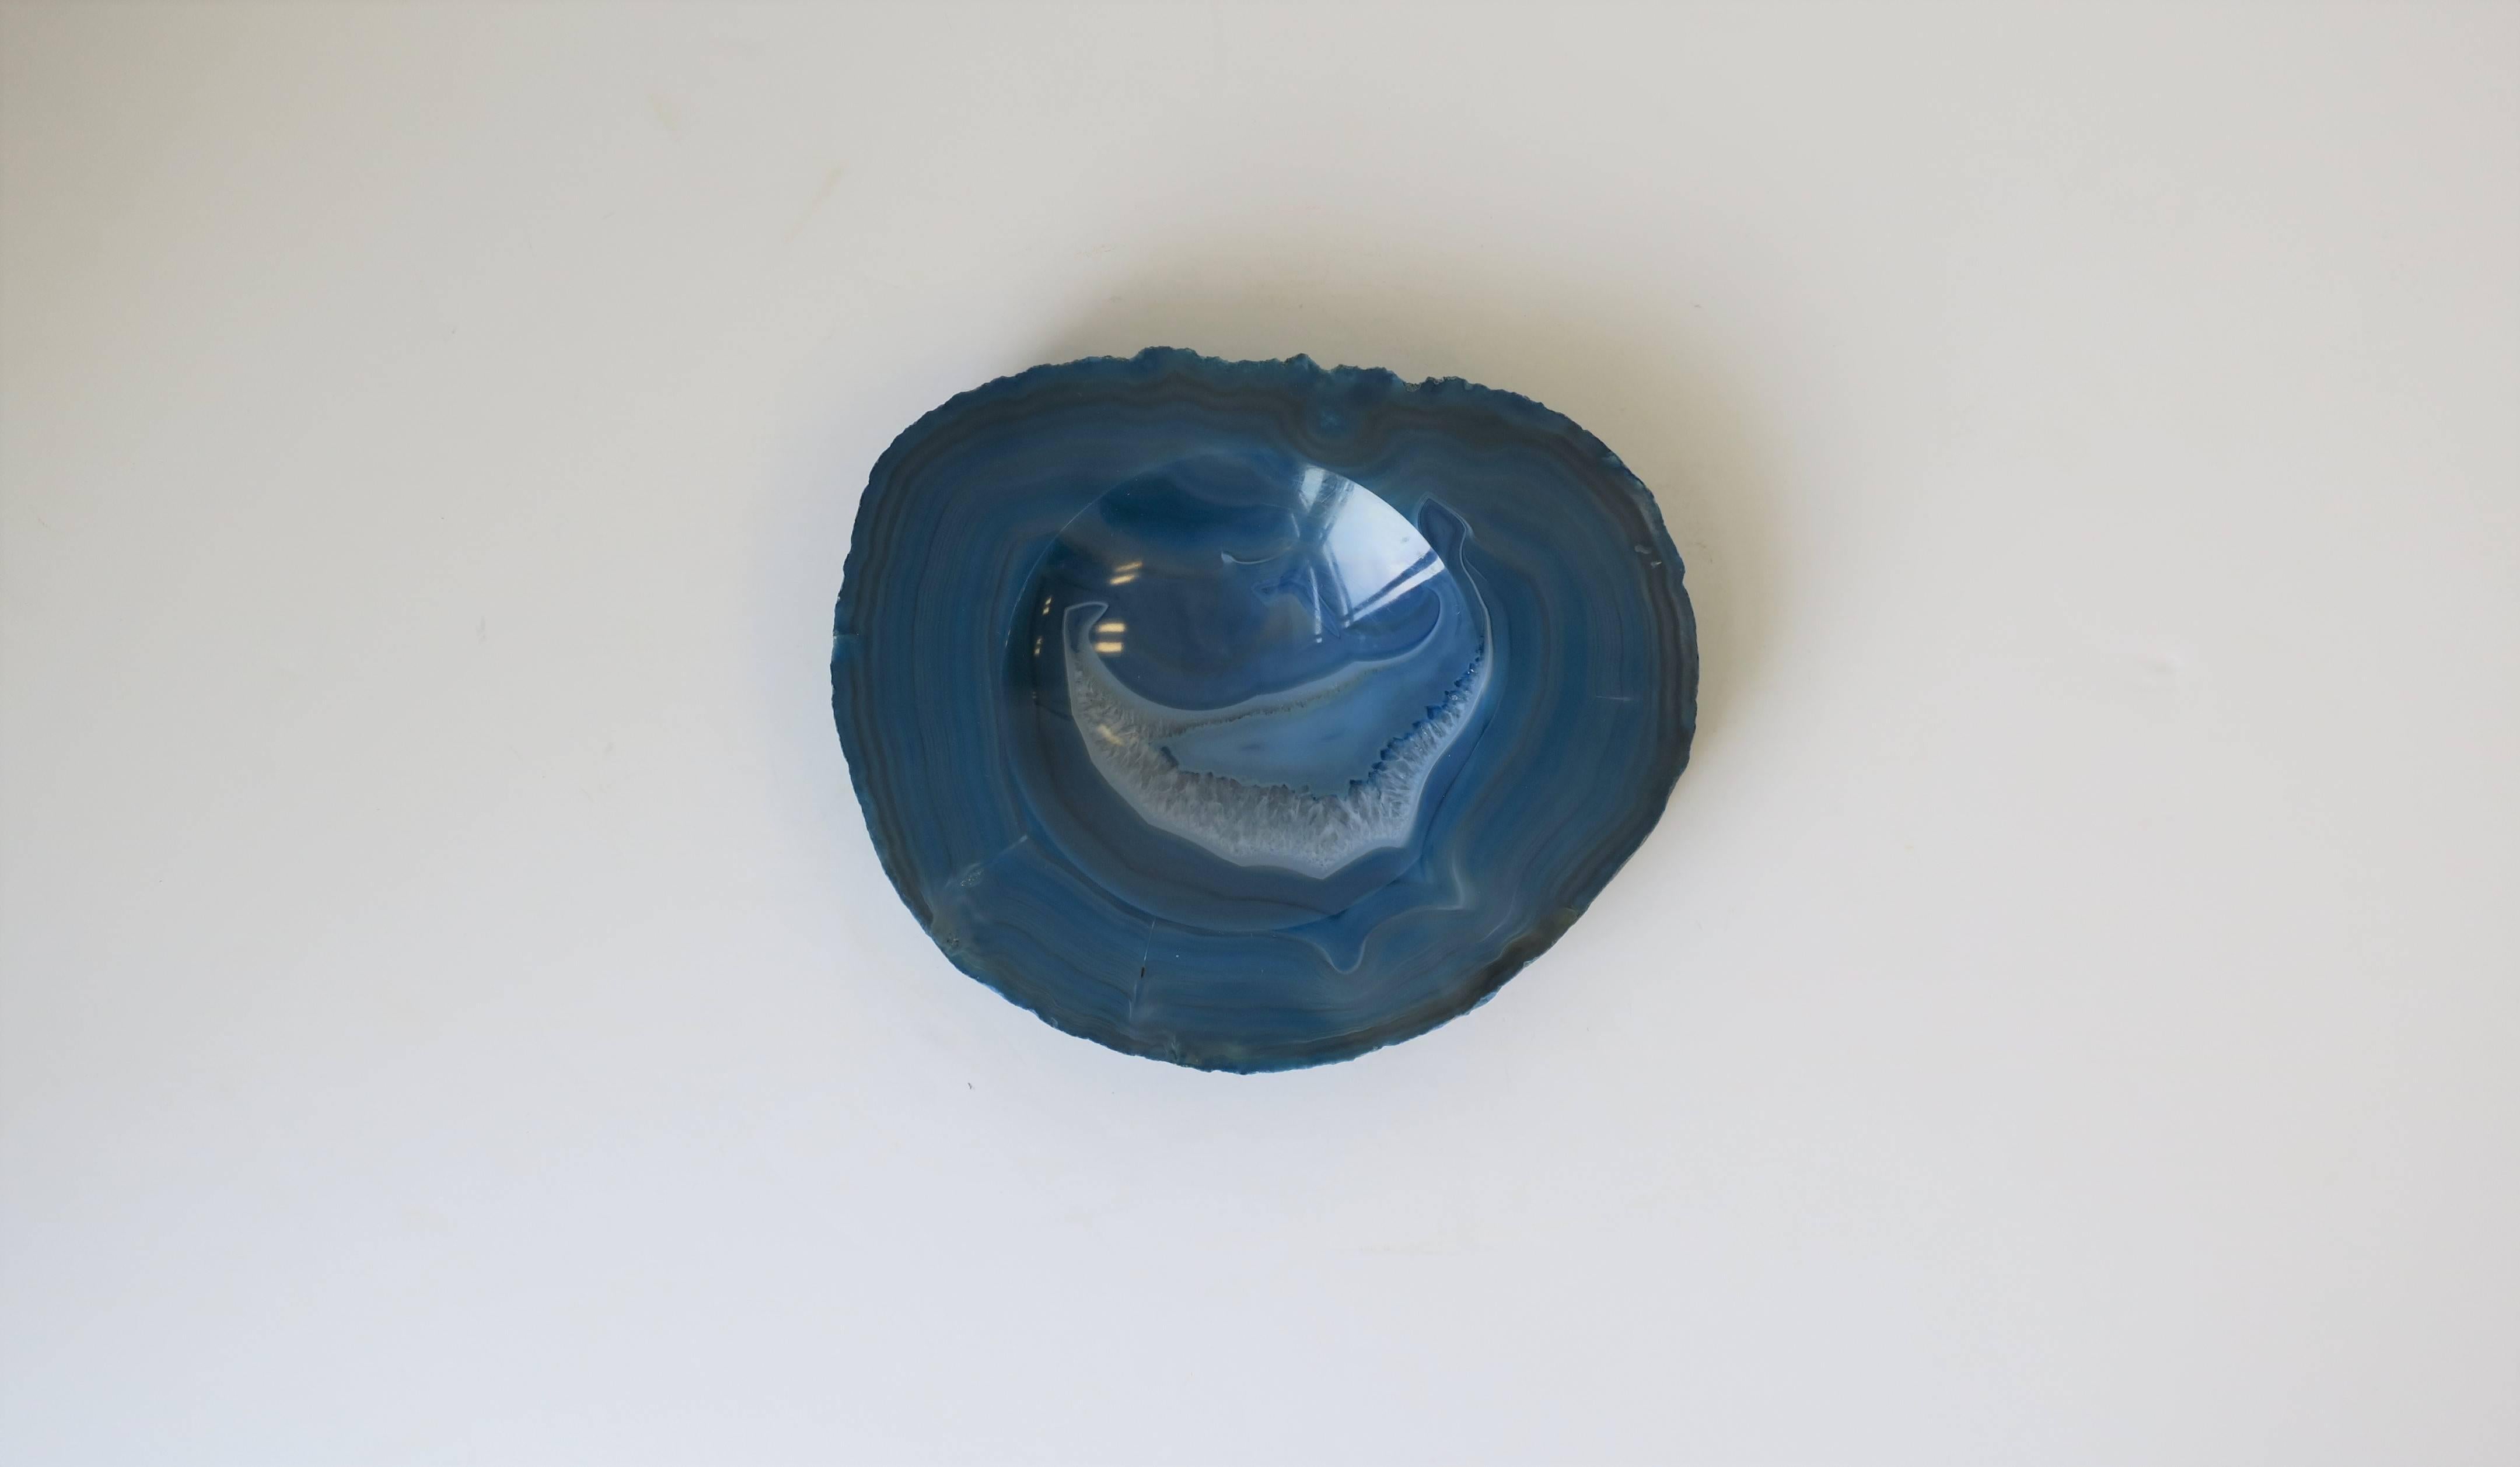 A blue and white agate/onyx vessel (shallow bowl) or decorative object. Piece can work as a small jewelry dish, standalone piece, or paperweight/desk accessory for small items, etc. Elegant and convenient for a table, desk, shelf, vanity, closet,